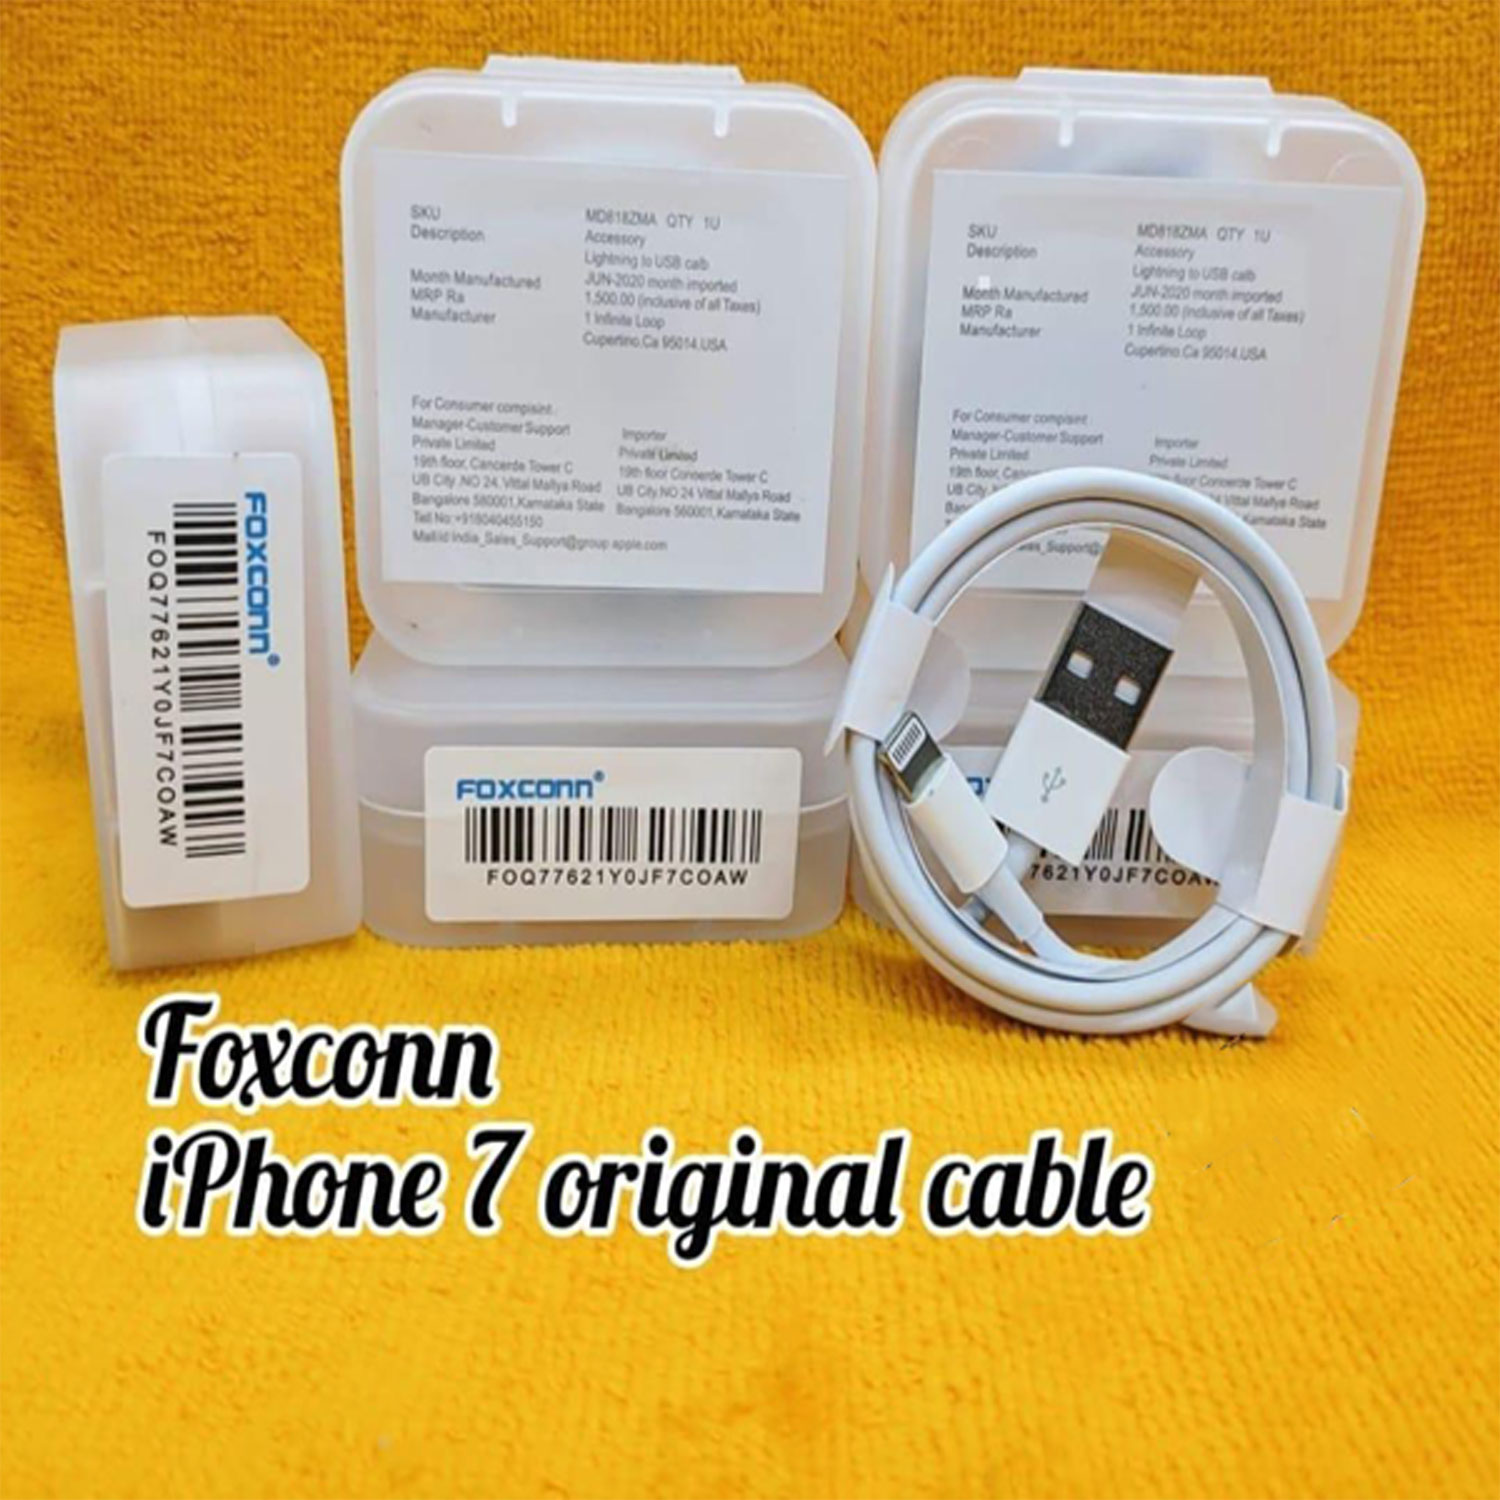 FOXCONN iPhone 7 Original Cable (Length - 1 M) (Data Transfer - Yes)